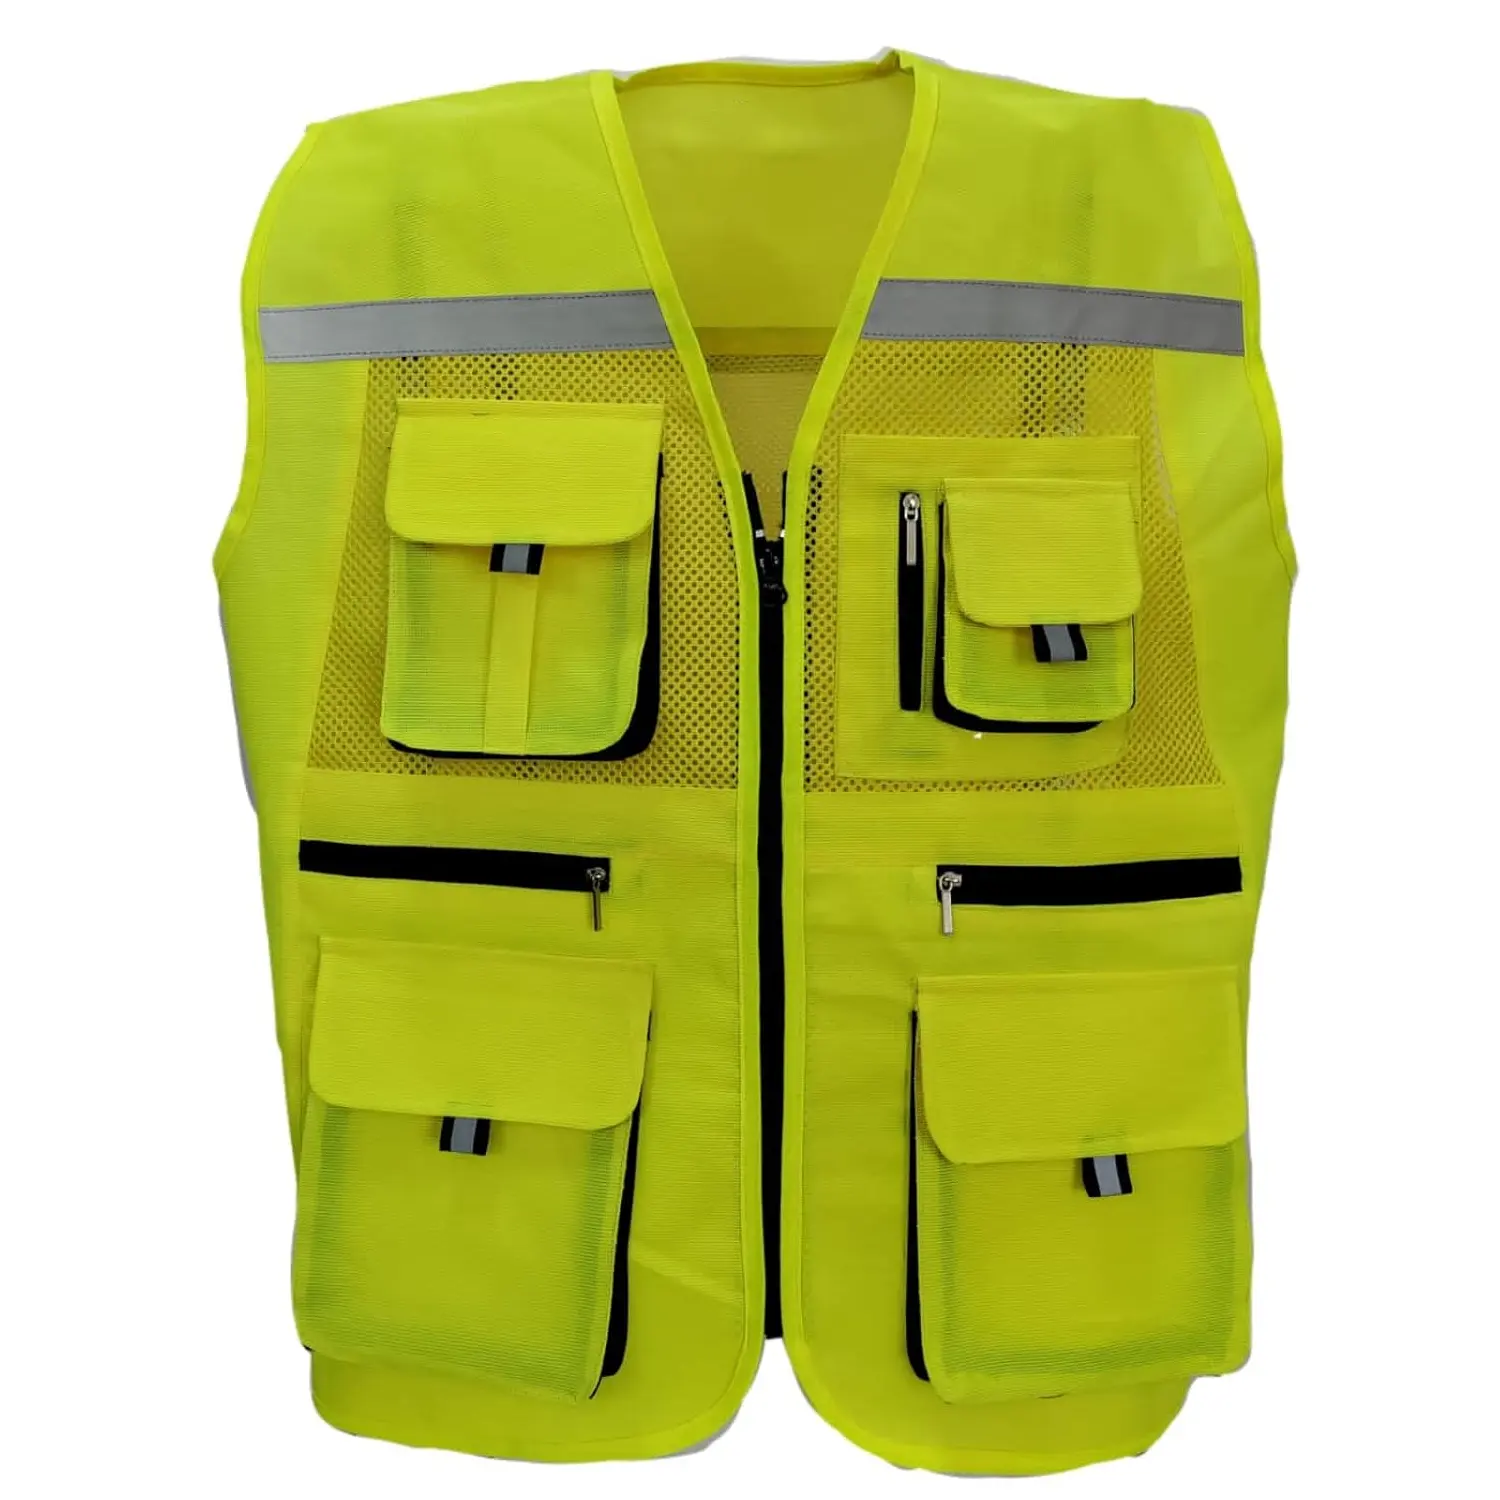 Hot Selling Cheap Price Premium Quality Reflective Sleeveless Vest Construction Safety Vest Wholesale Price From Bangladesh